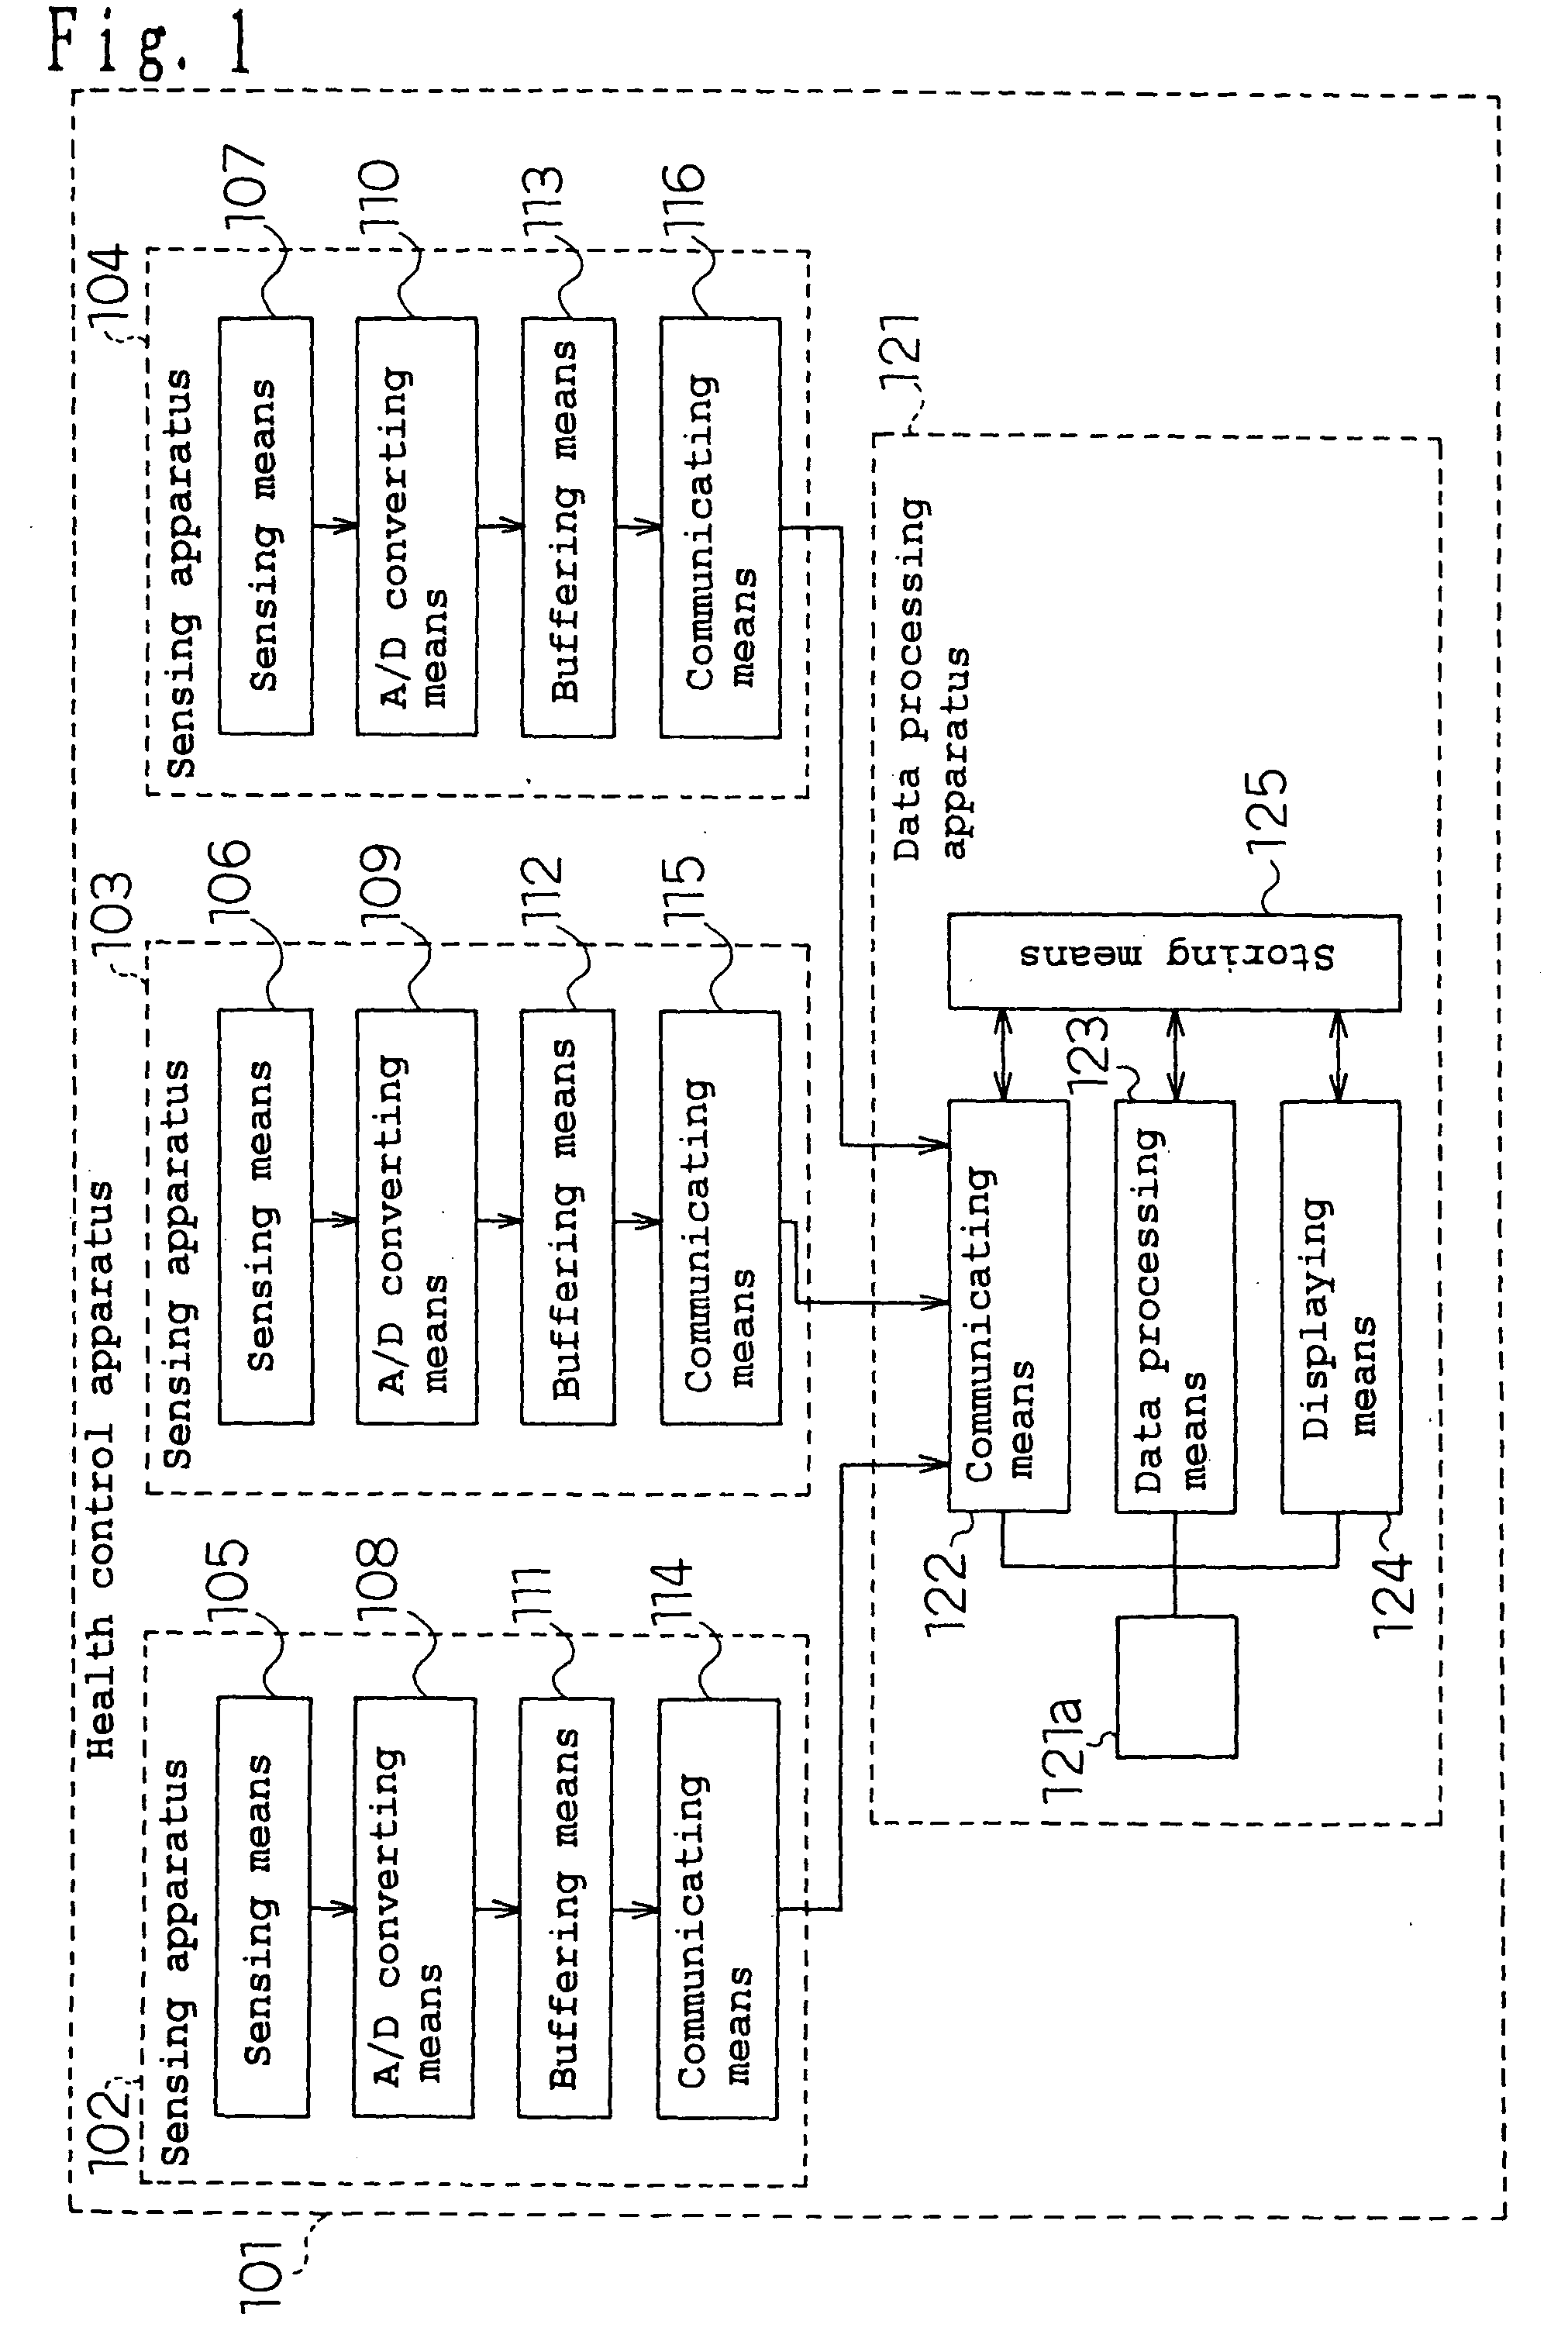 Vital signs detection system, vital signs detection method, vital signs processing apparatus, and health control method